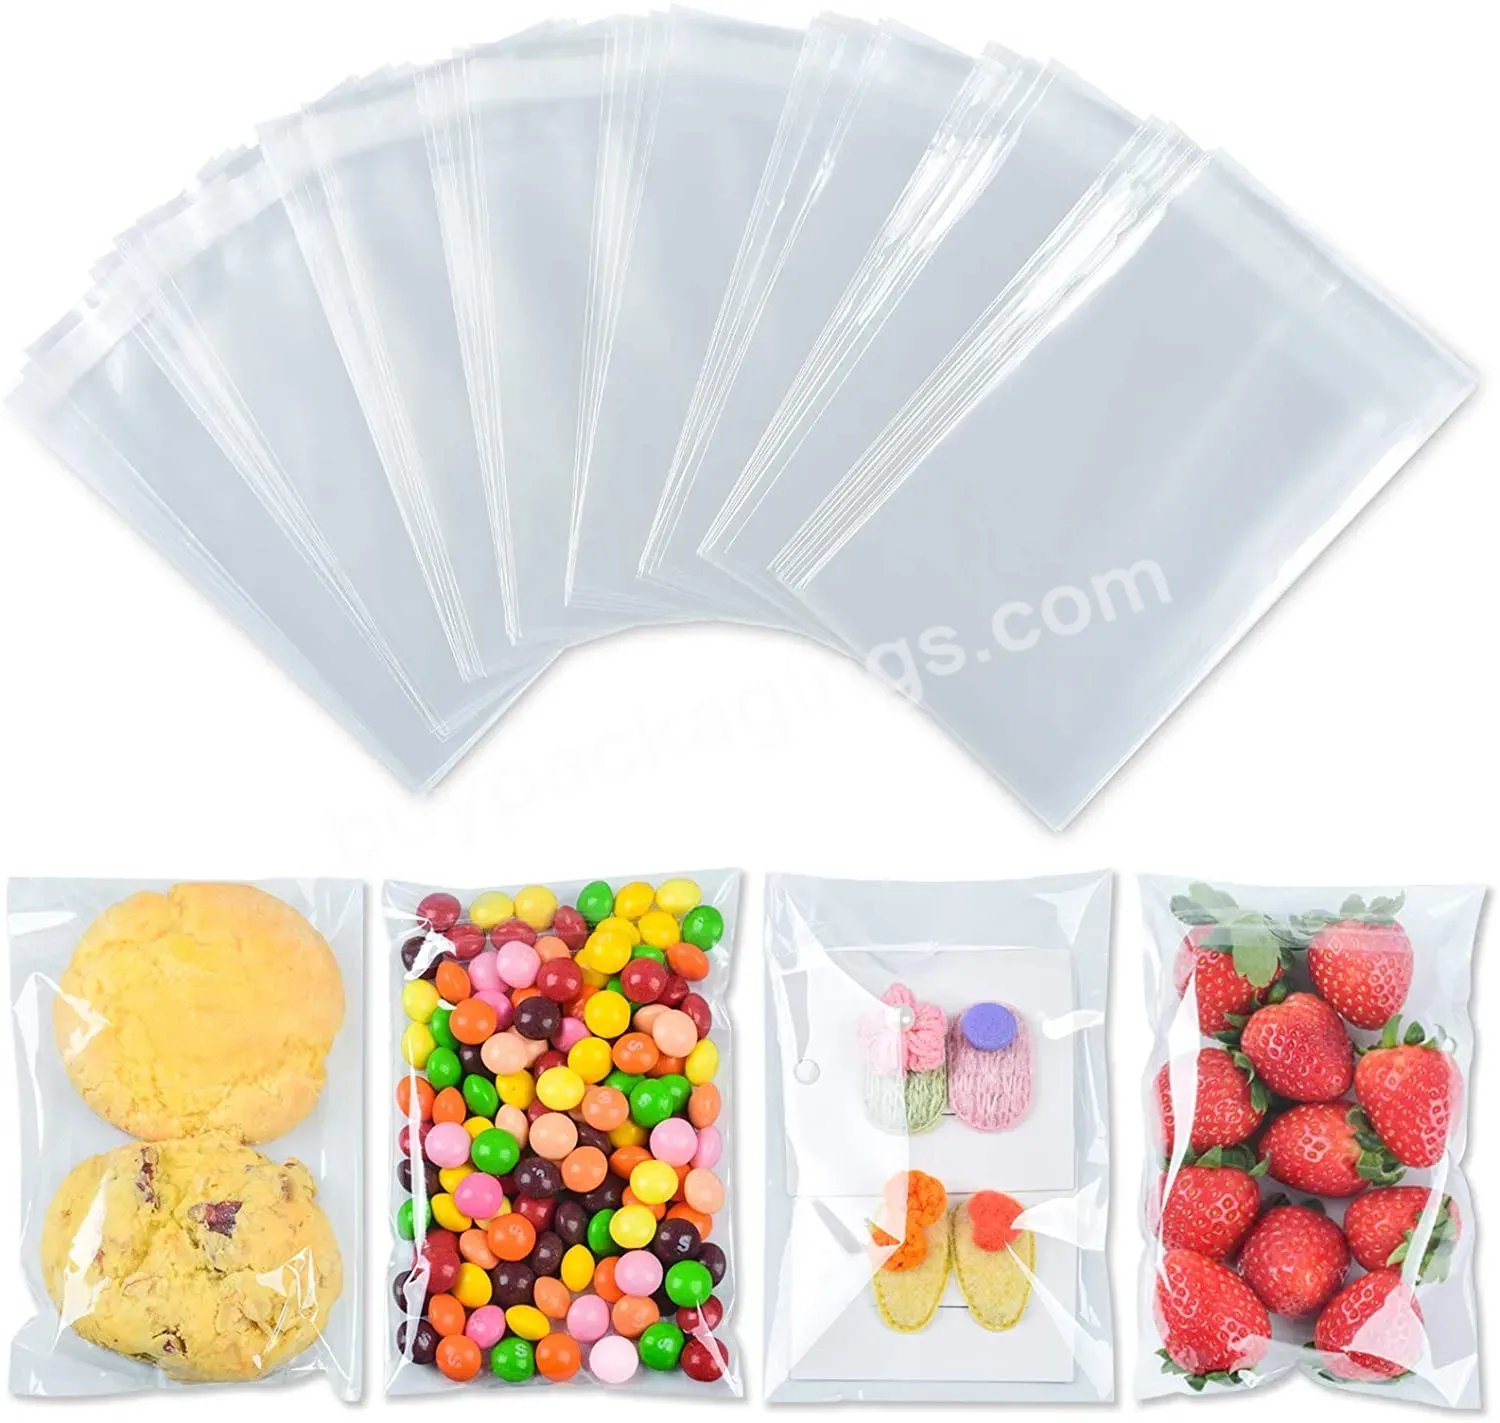 Self Adhesive Clear Plastic Bag Resealable Cellophane Packaging For Candy,Cookie - Buy Resealable Cellophane Packaging For Candy,Clear Self Adhesive Bag,Clear Plastic Packaging.